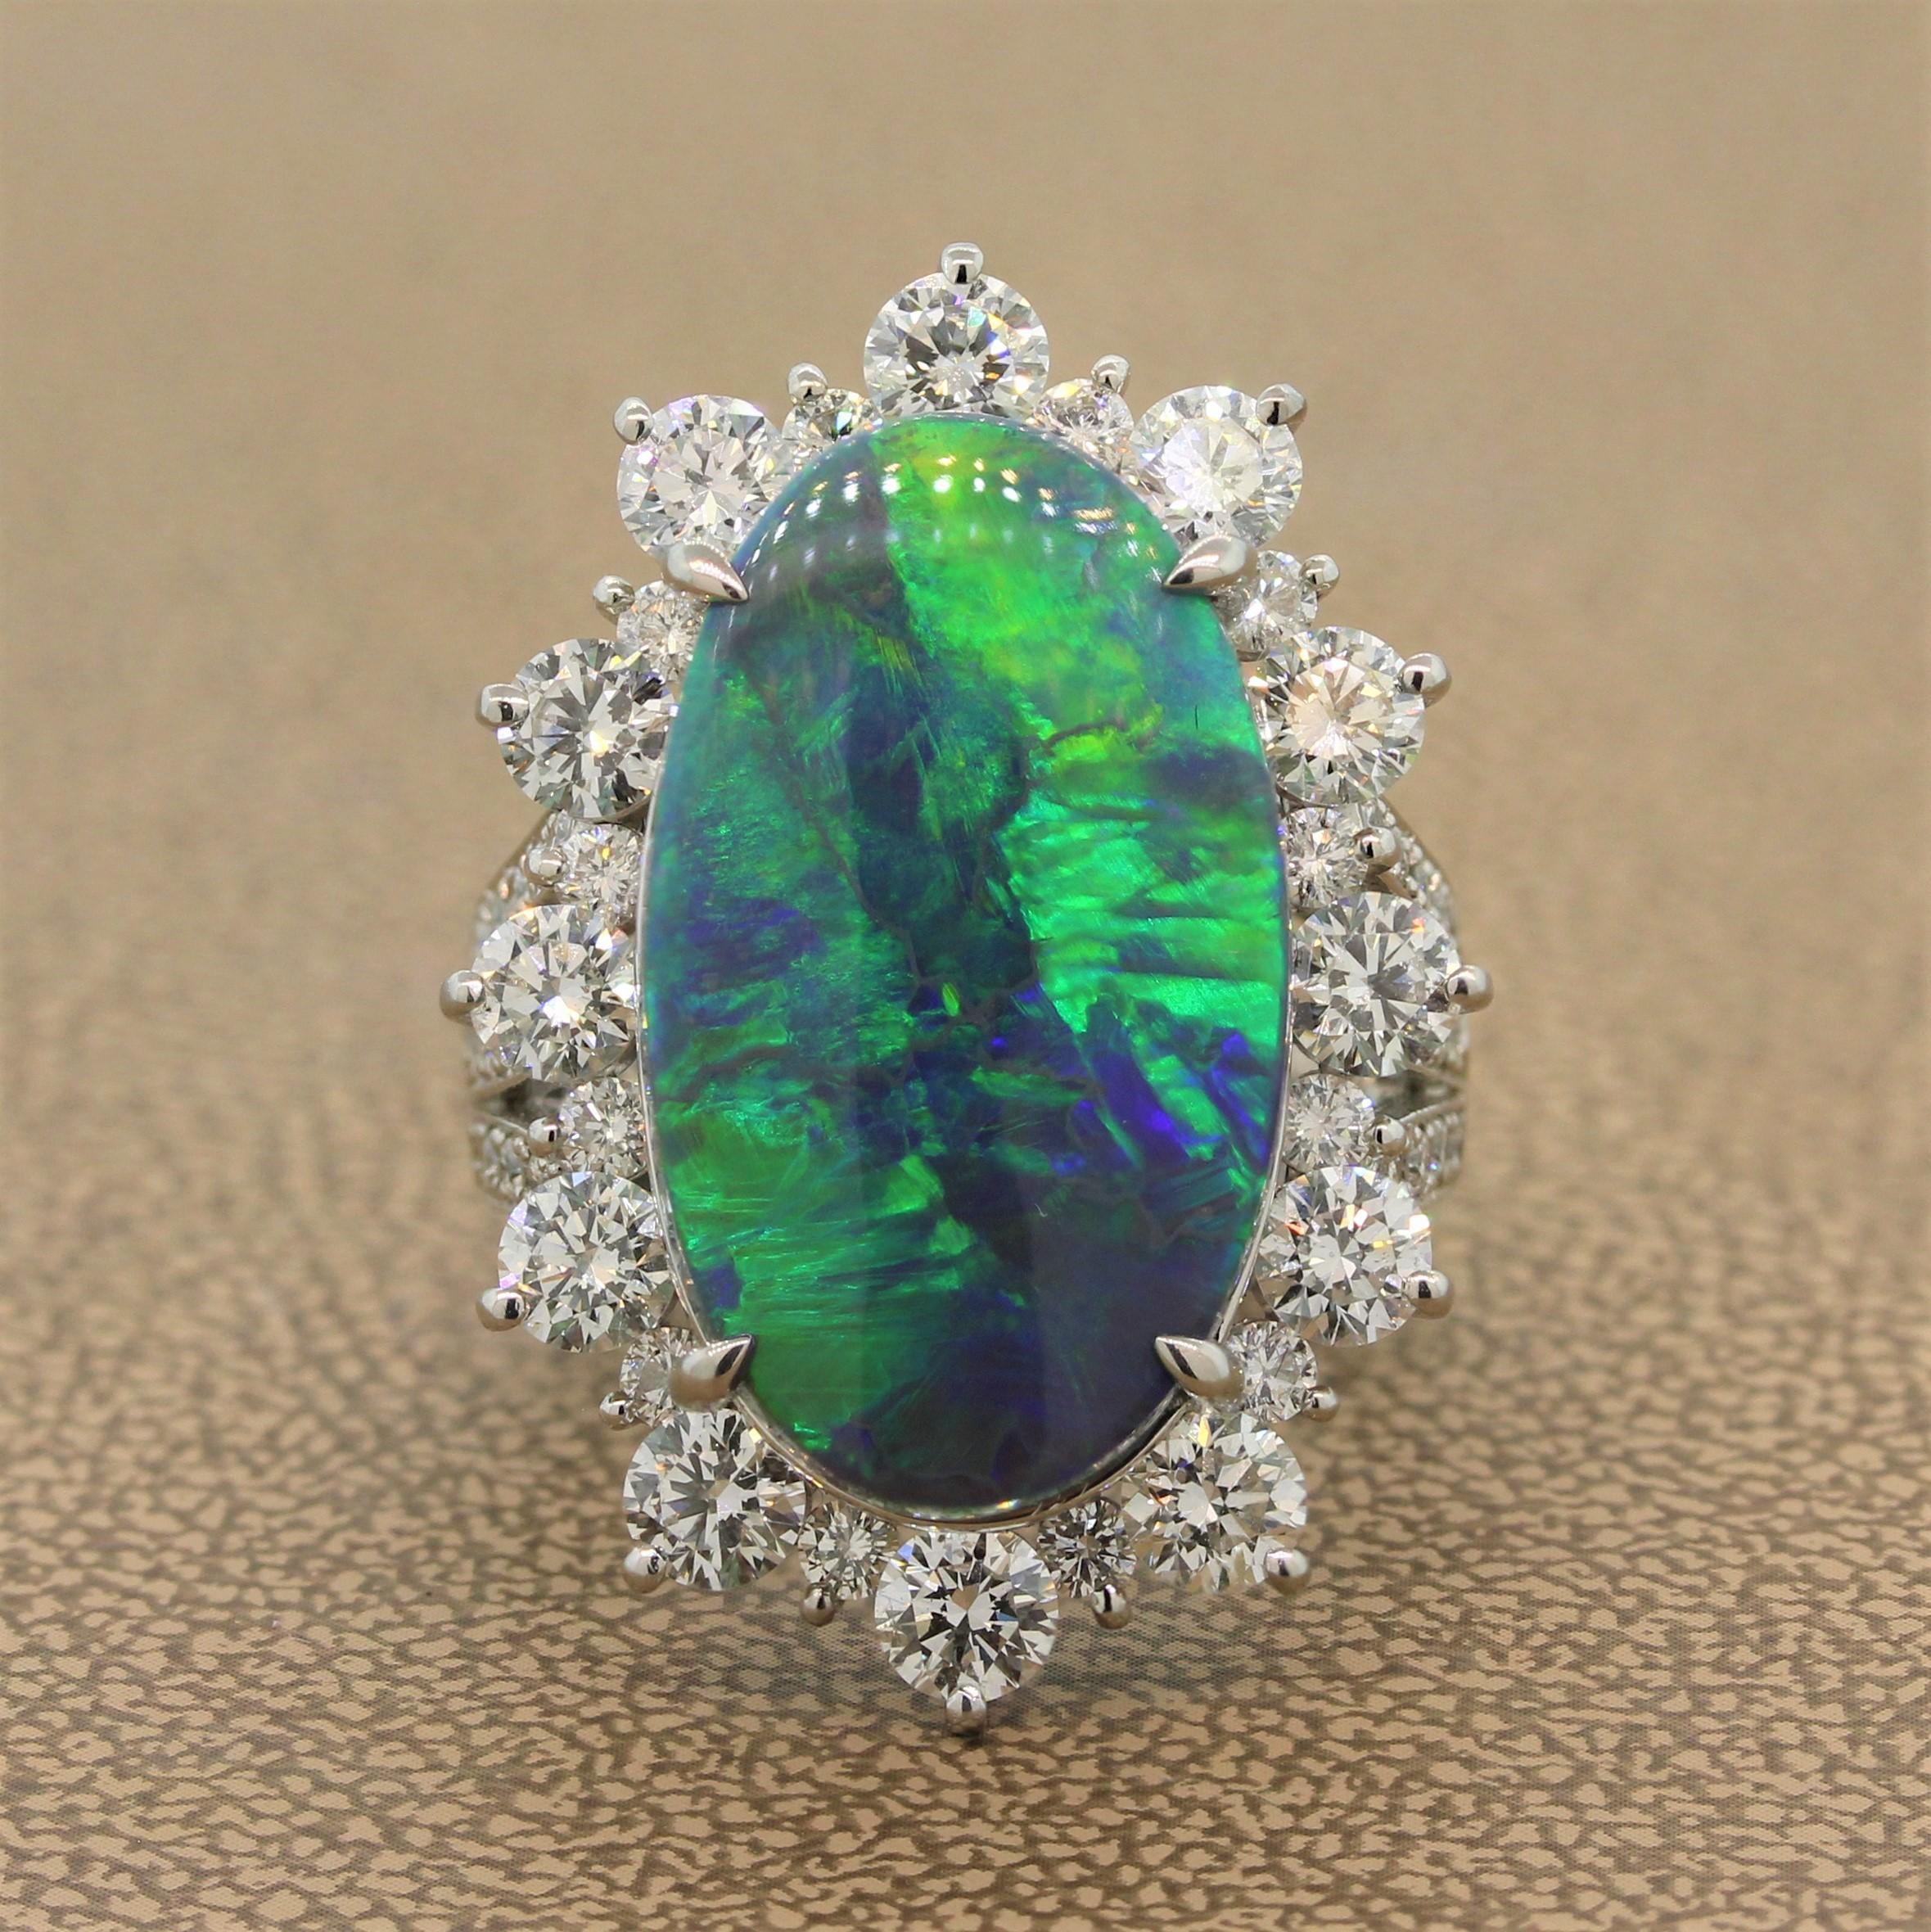 A magnificent 11.74 carat Australian opal in a platinum setting with a double split shank. The elongated opal shows amazing play of color with bright and string flashes of green and blue. It is haloed by 3.15 carats of large round brilliant cut